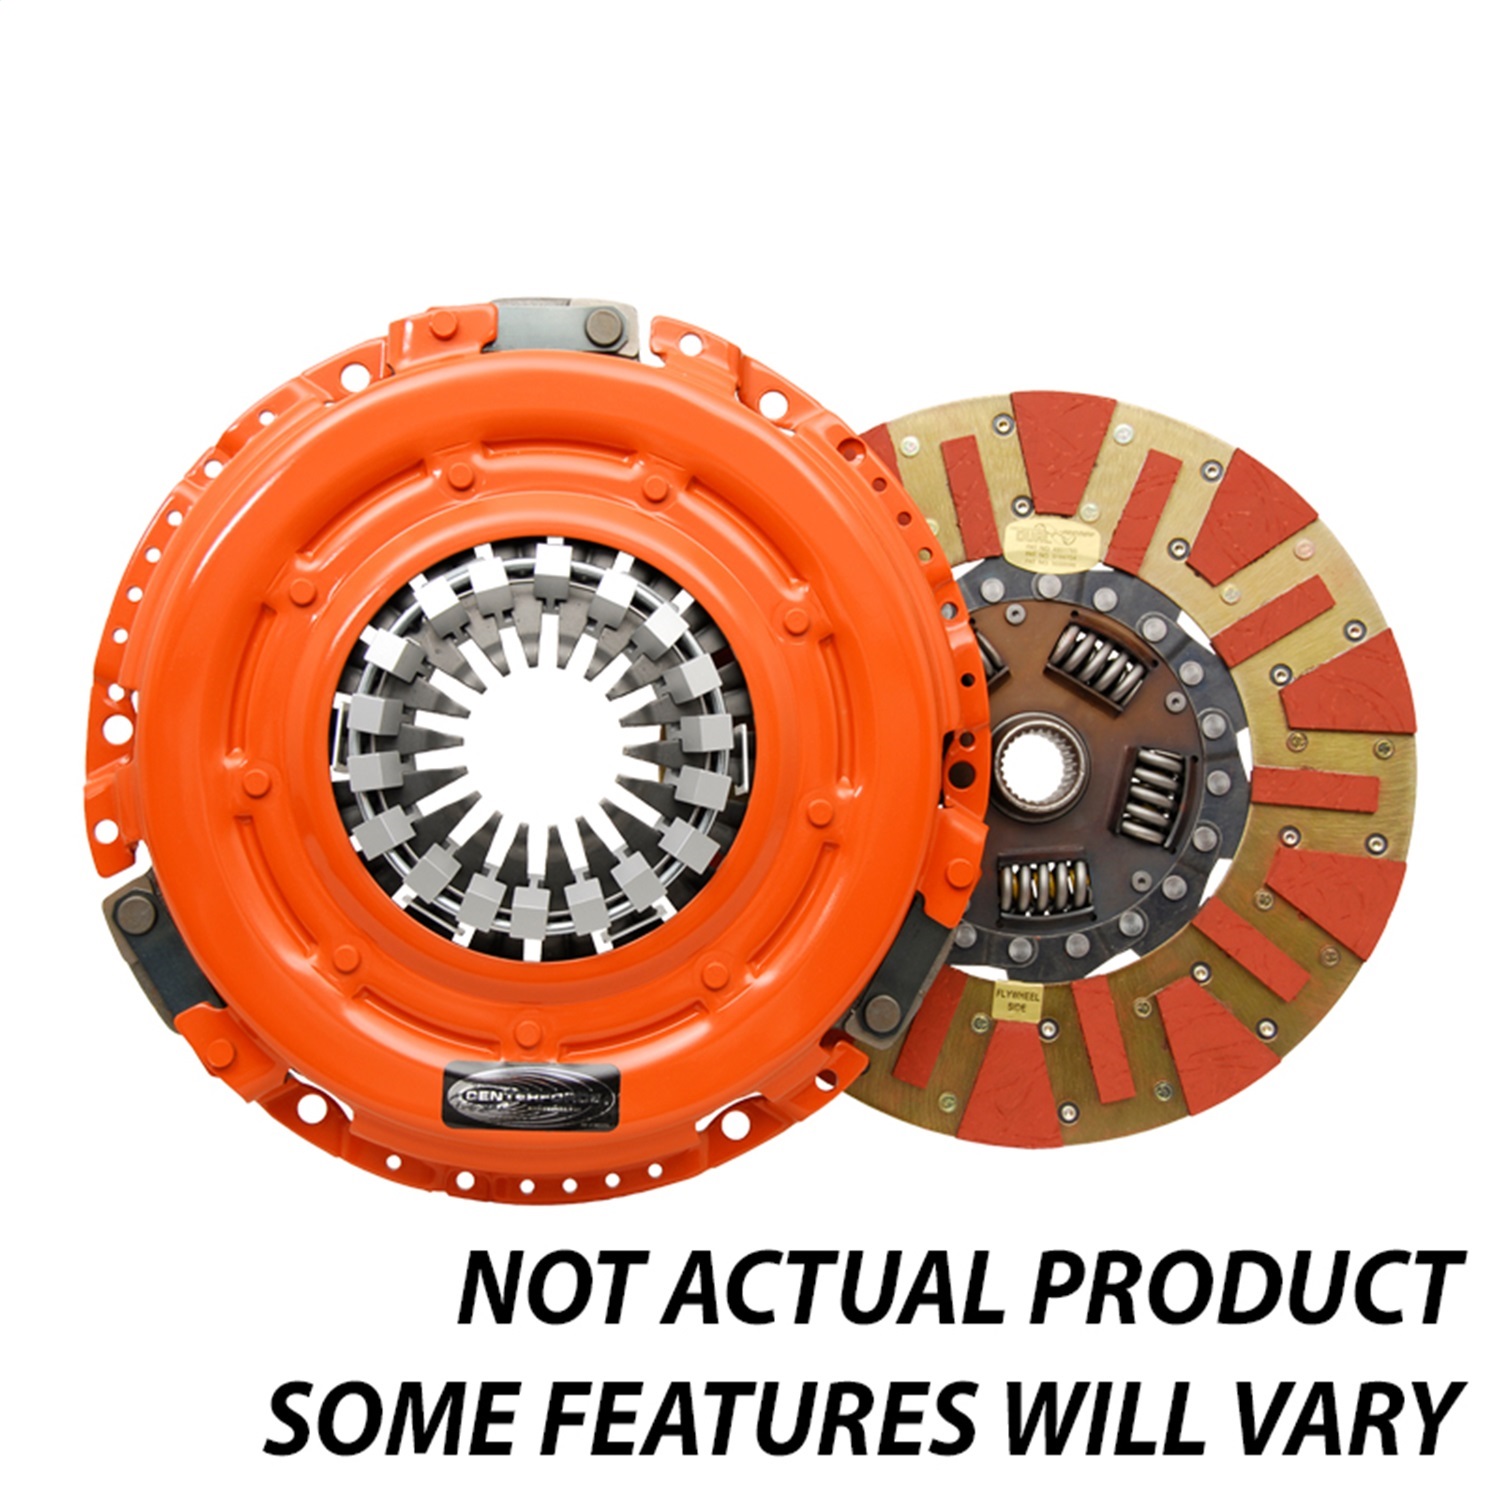 Centerforce Centerforce DF116116 Dual Friction Clutch Pressure Plate And Disc Set